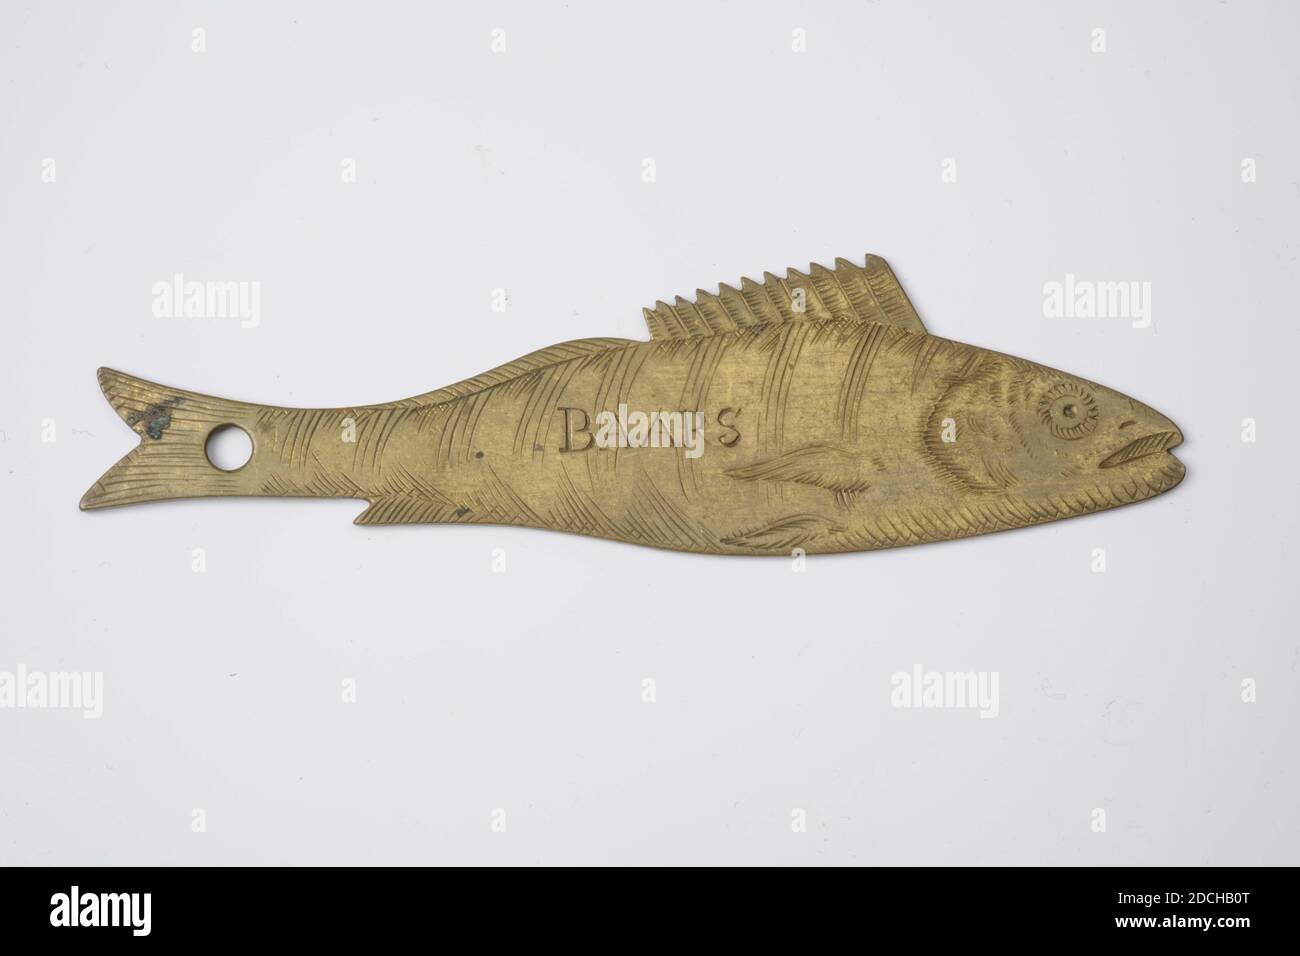 size, Anonymous, 18th century, General: 14,3 x 4,2 x 0,3cm 143 x 42 x 3mm, Yard Copper fish yardstick, to check fish size. The yardstick is engraved with the species name BAARS. The fins are also engraved. In the tail is a round recess, fish Stock Photo